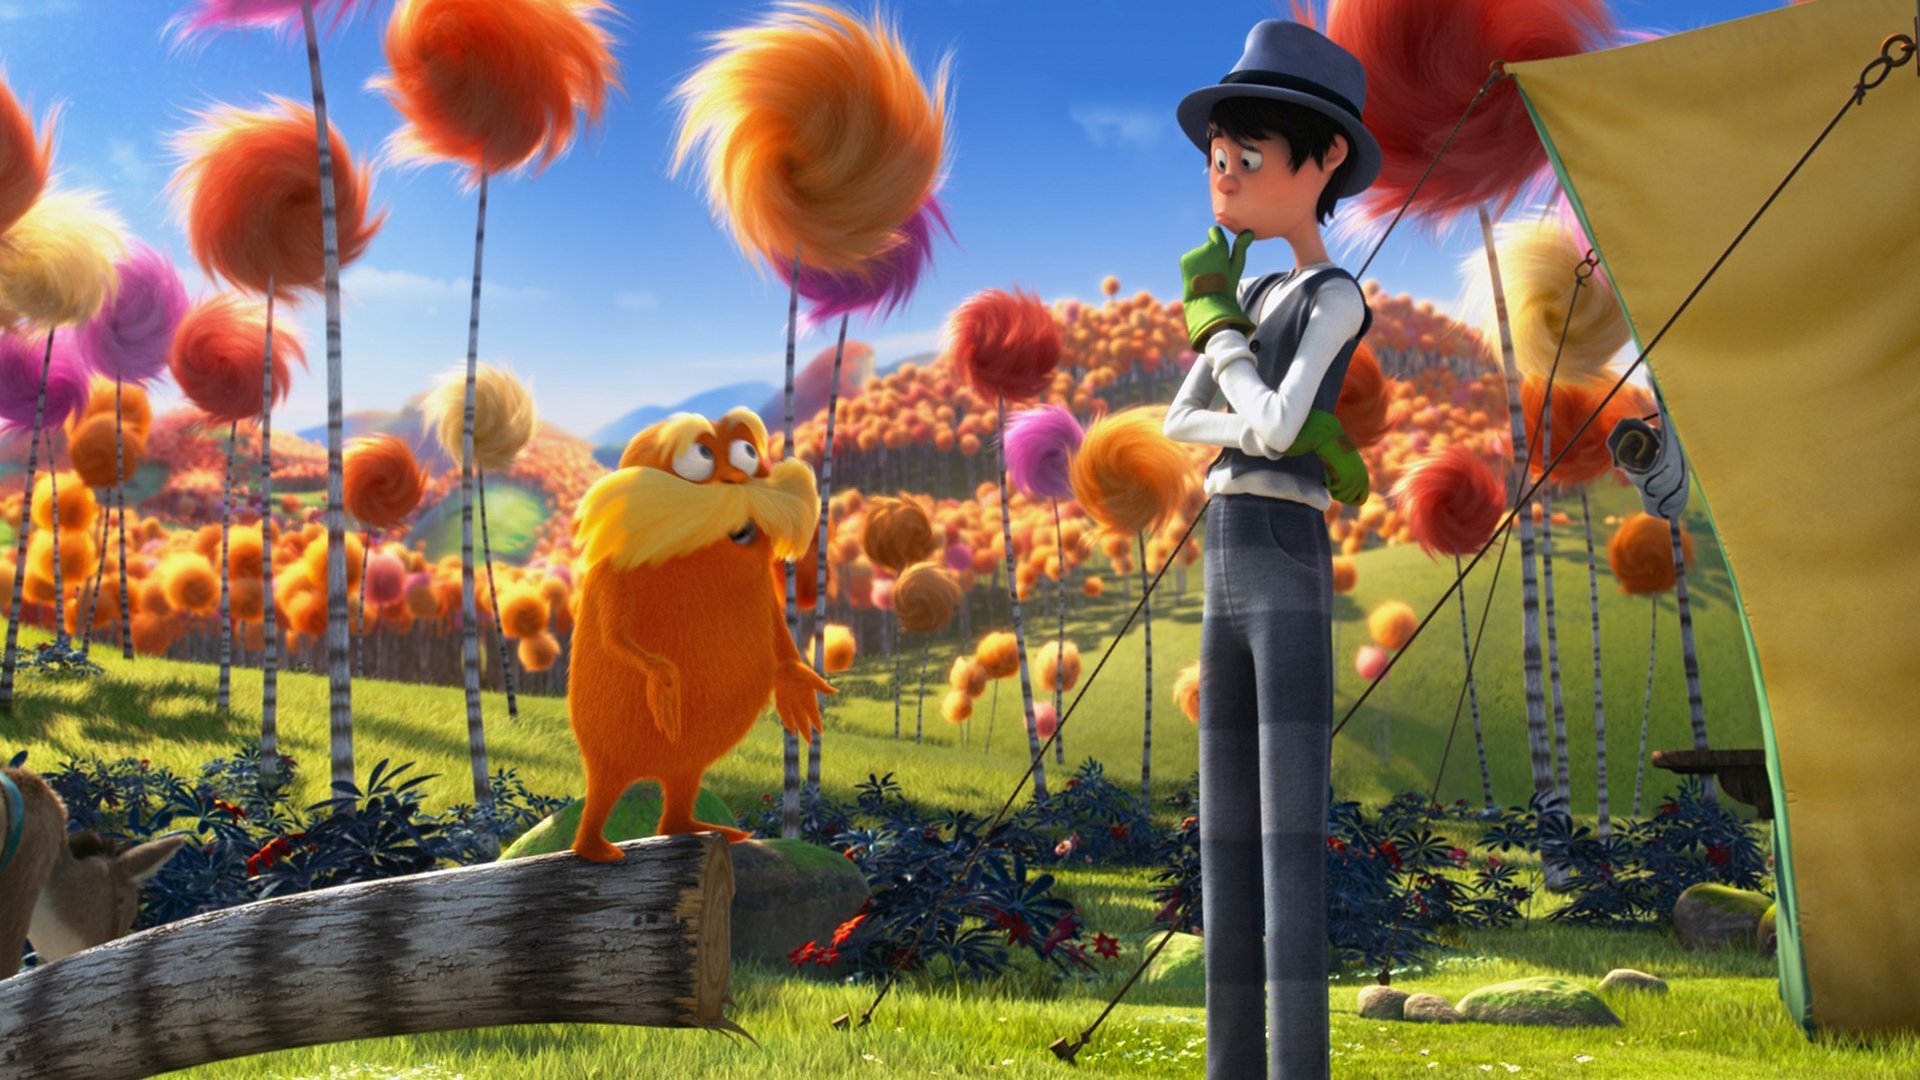 Download The Once Ler Movie The Lorax Hd Wallpaper 